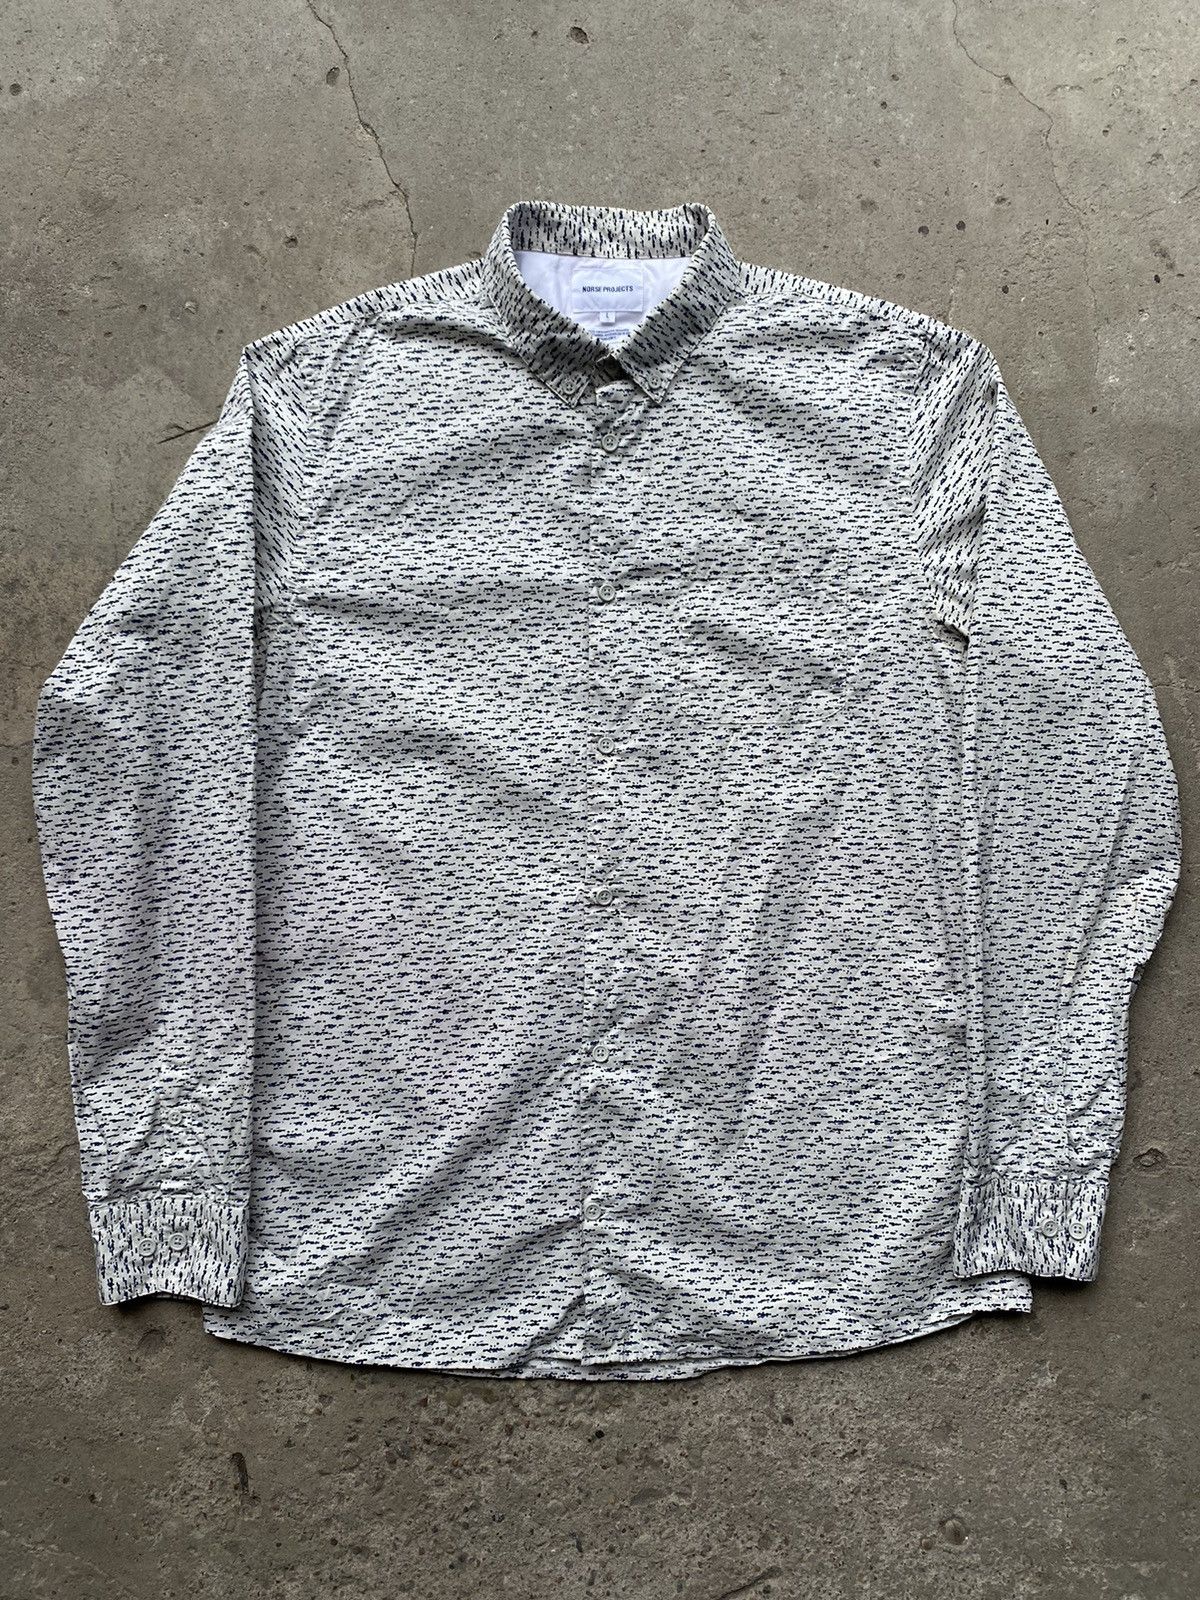 Norse Projects Norse projects shirt Emil slub print | Grailed